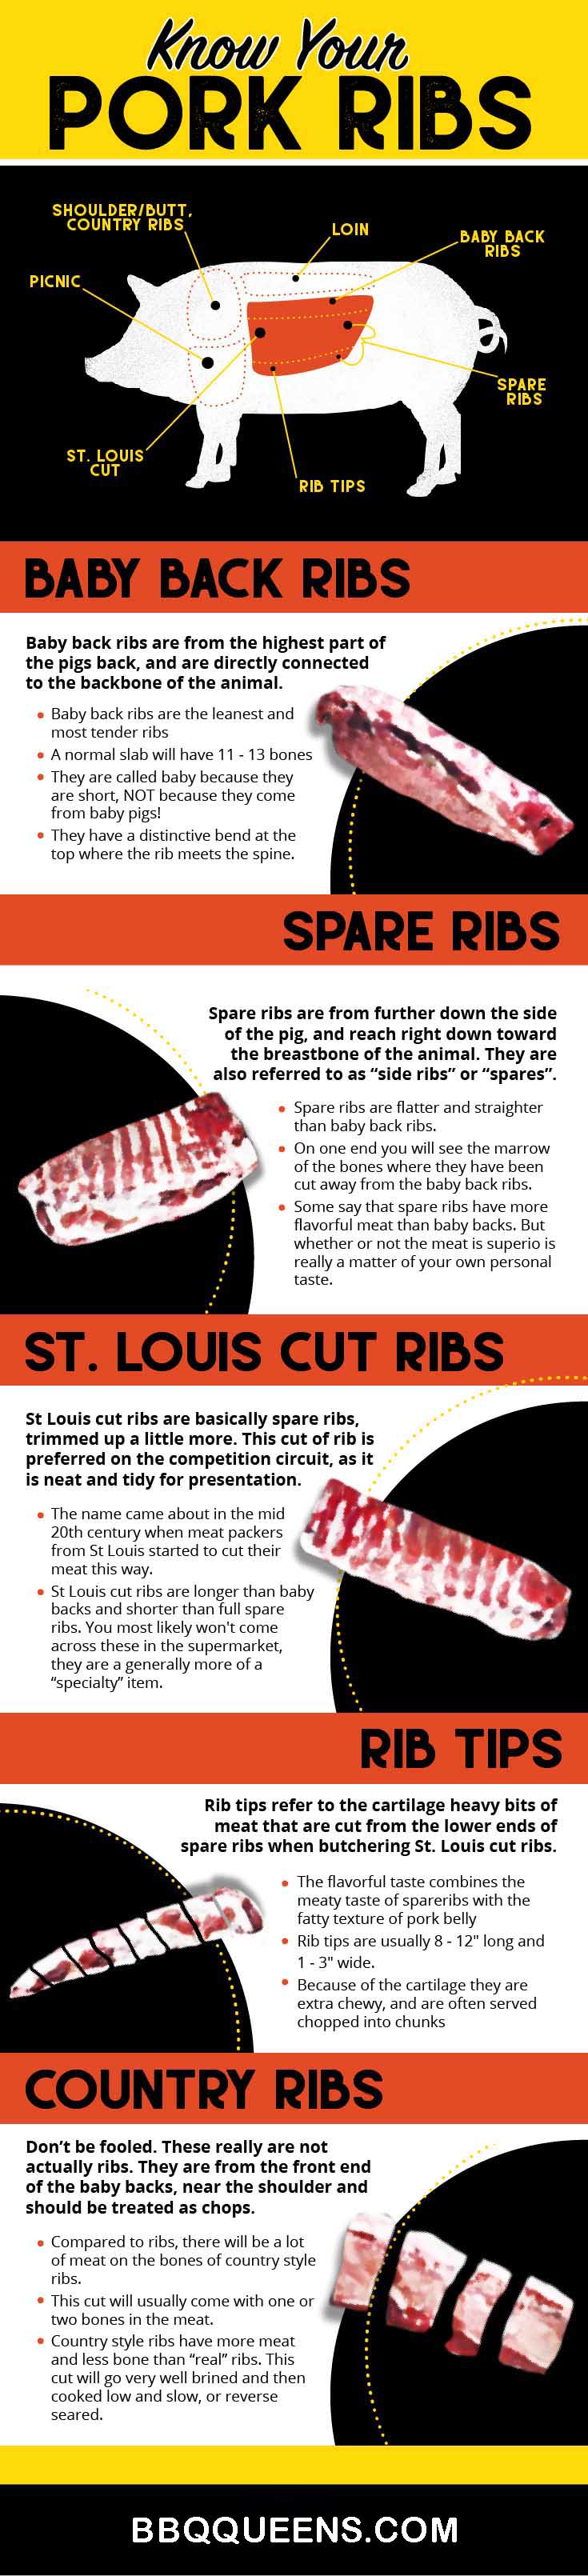 Know-your-pork-ribs-inforgraphic